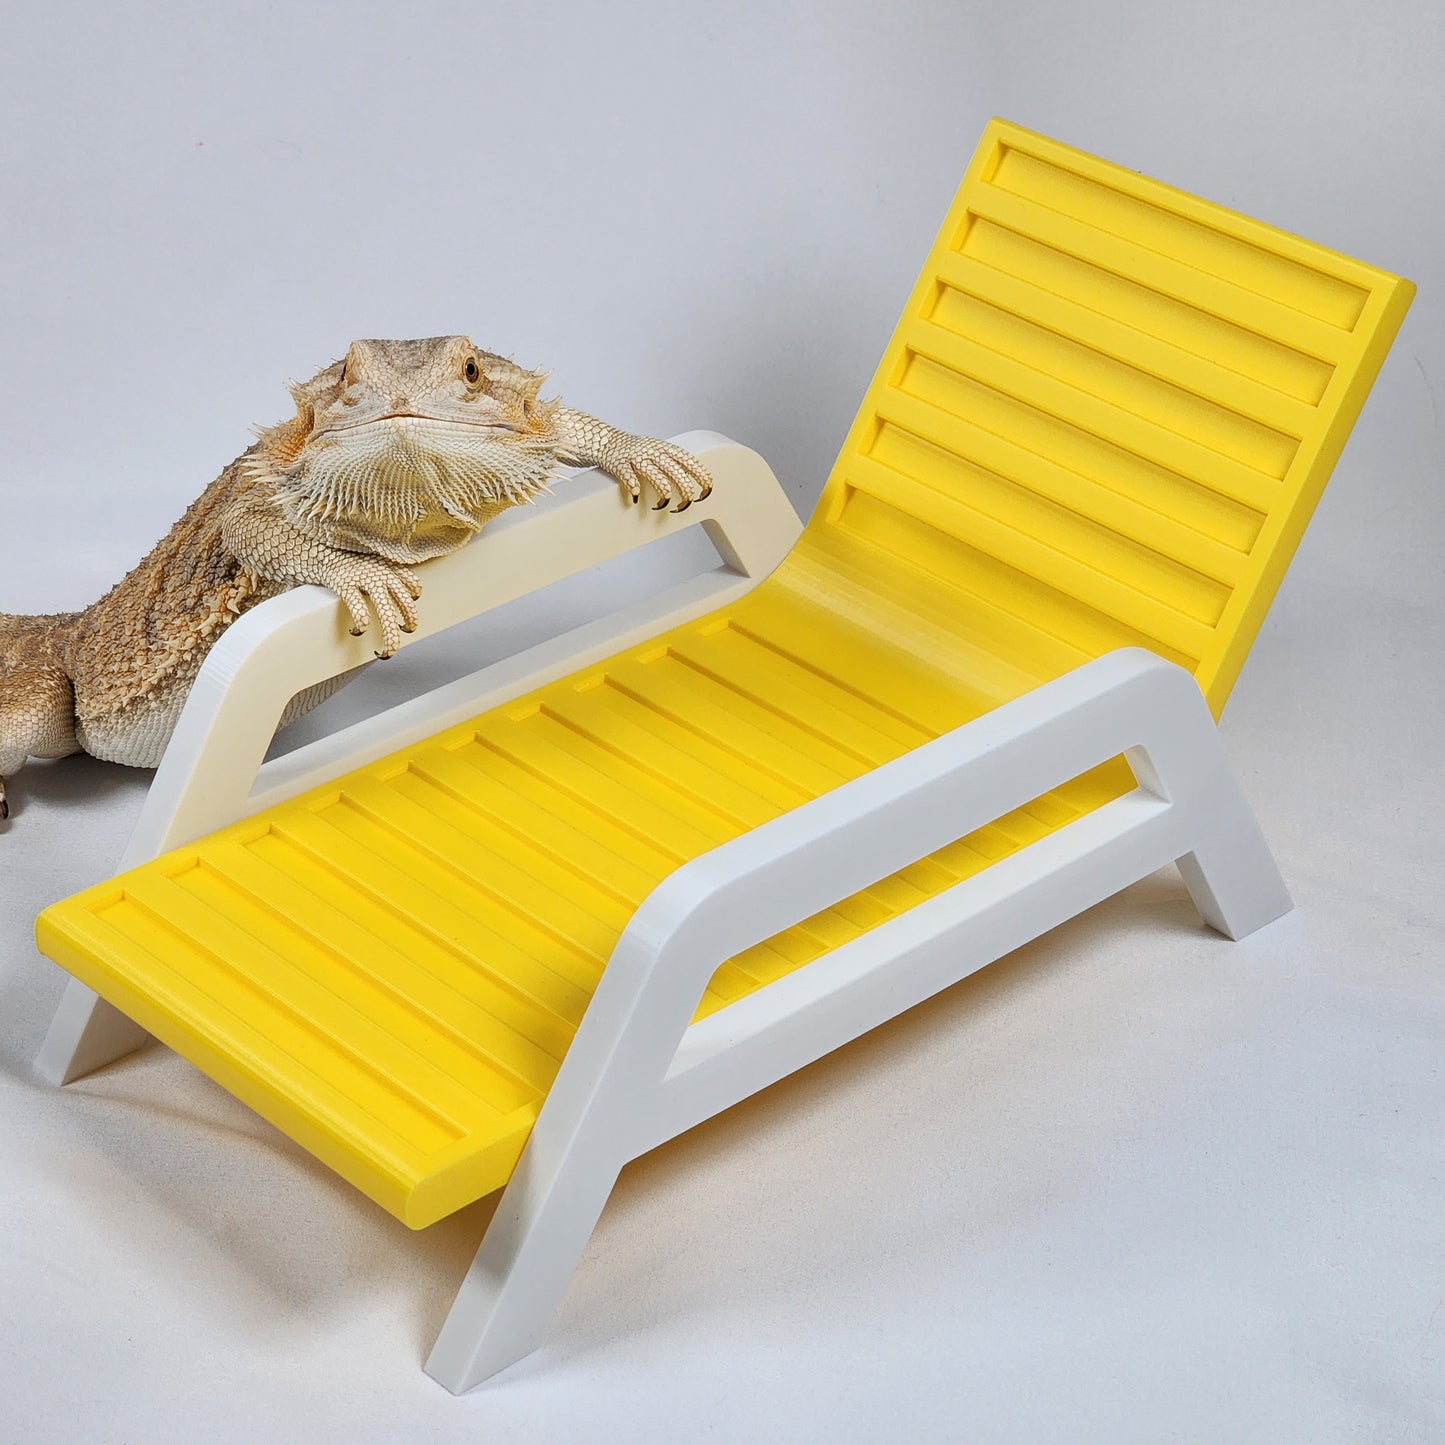 Reptile Lounging Chair 3.0 | Bearded dragon and leopard gecko hammock lounger and basking spot, Bearded dragon furniture decor